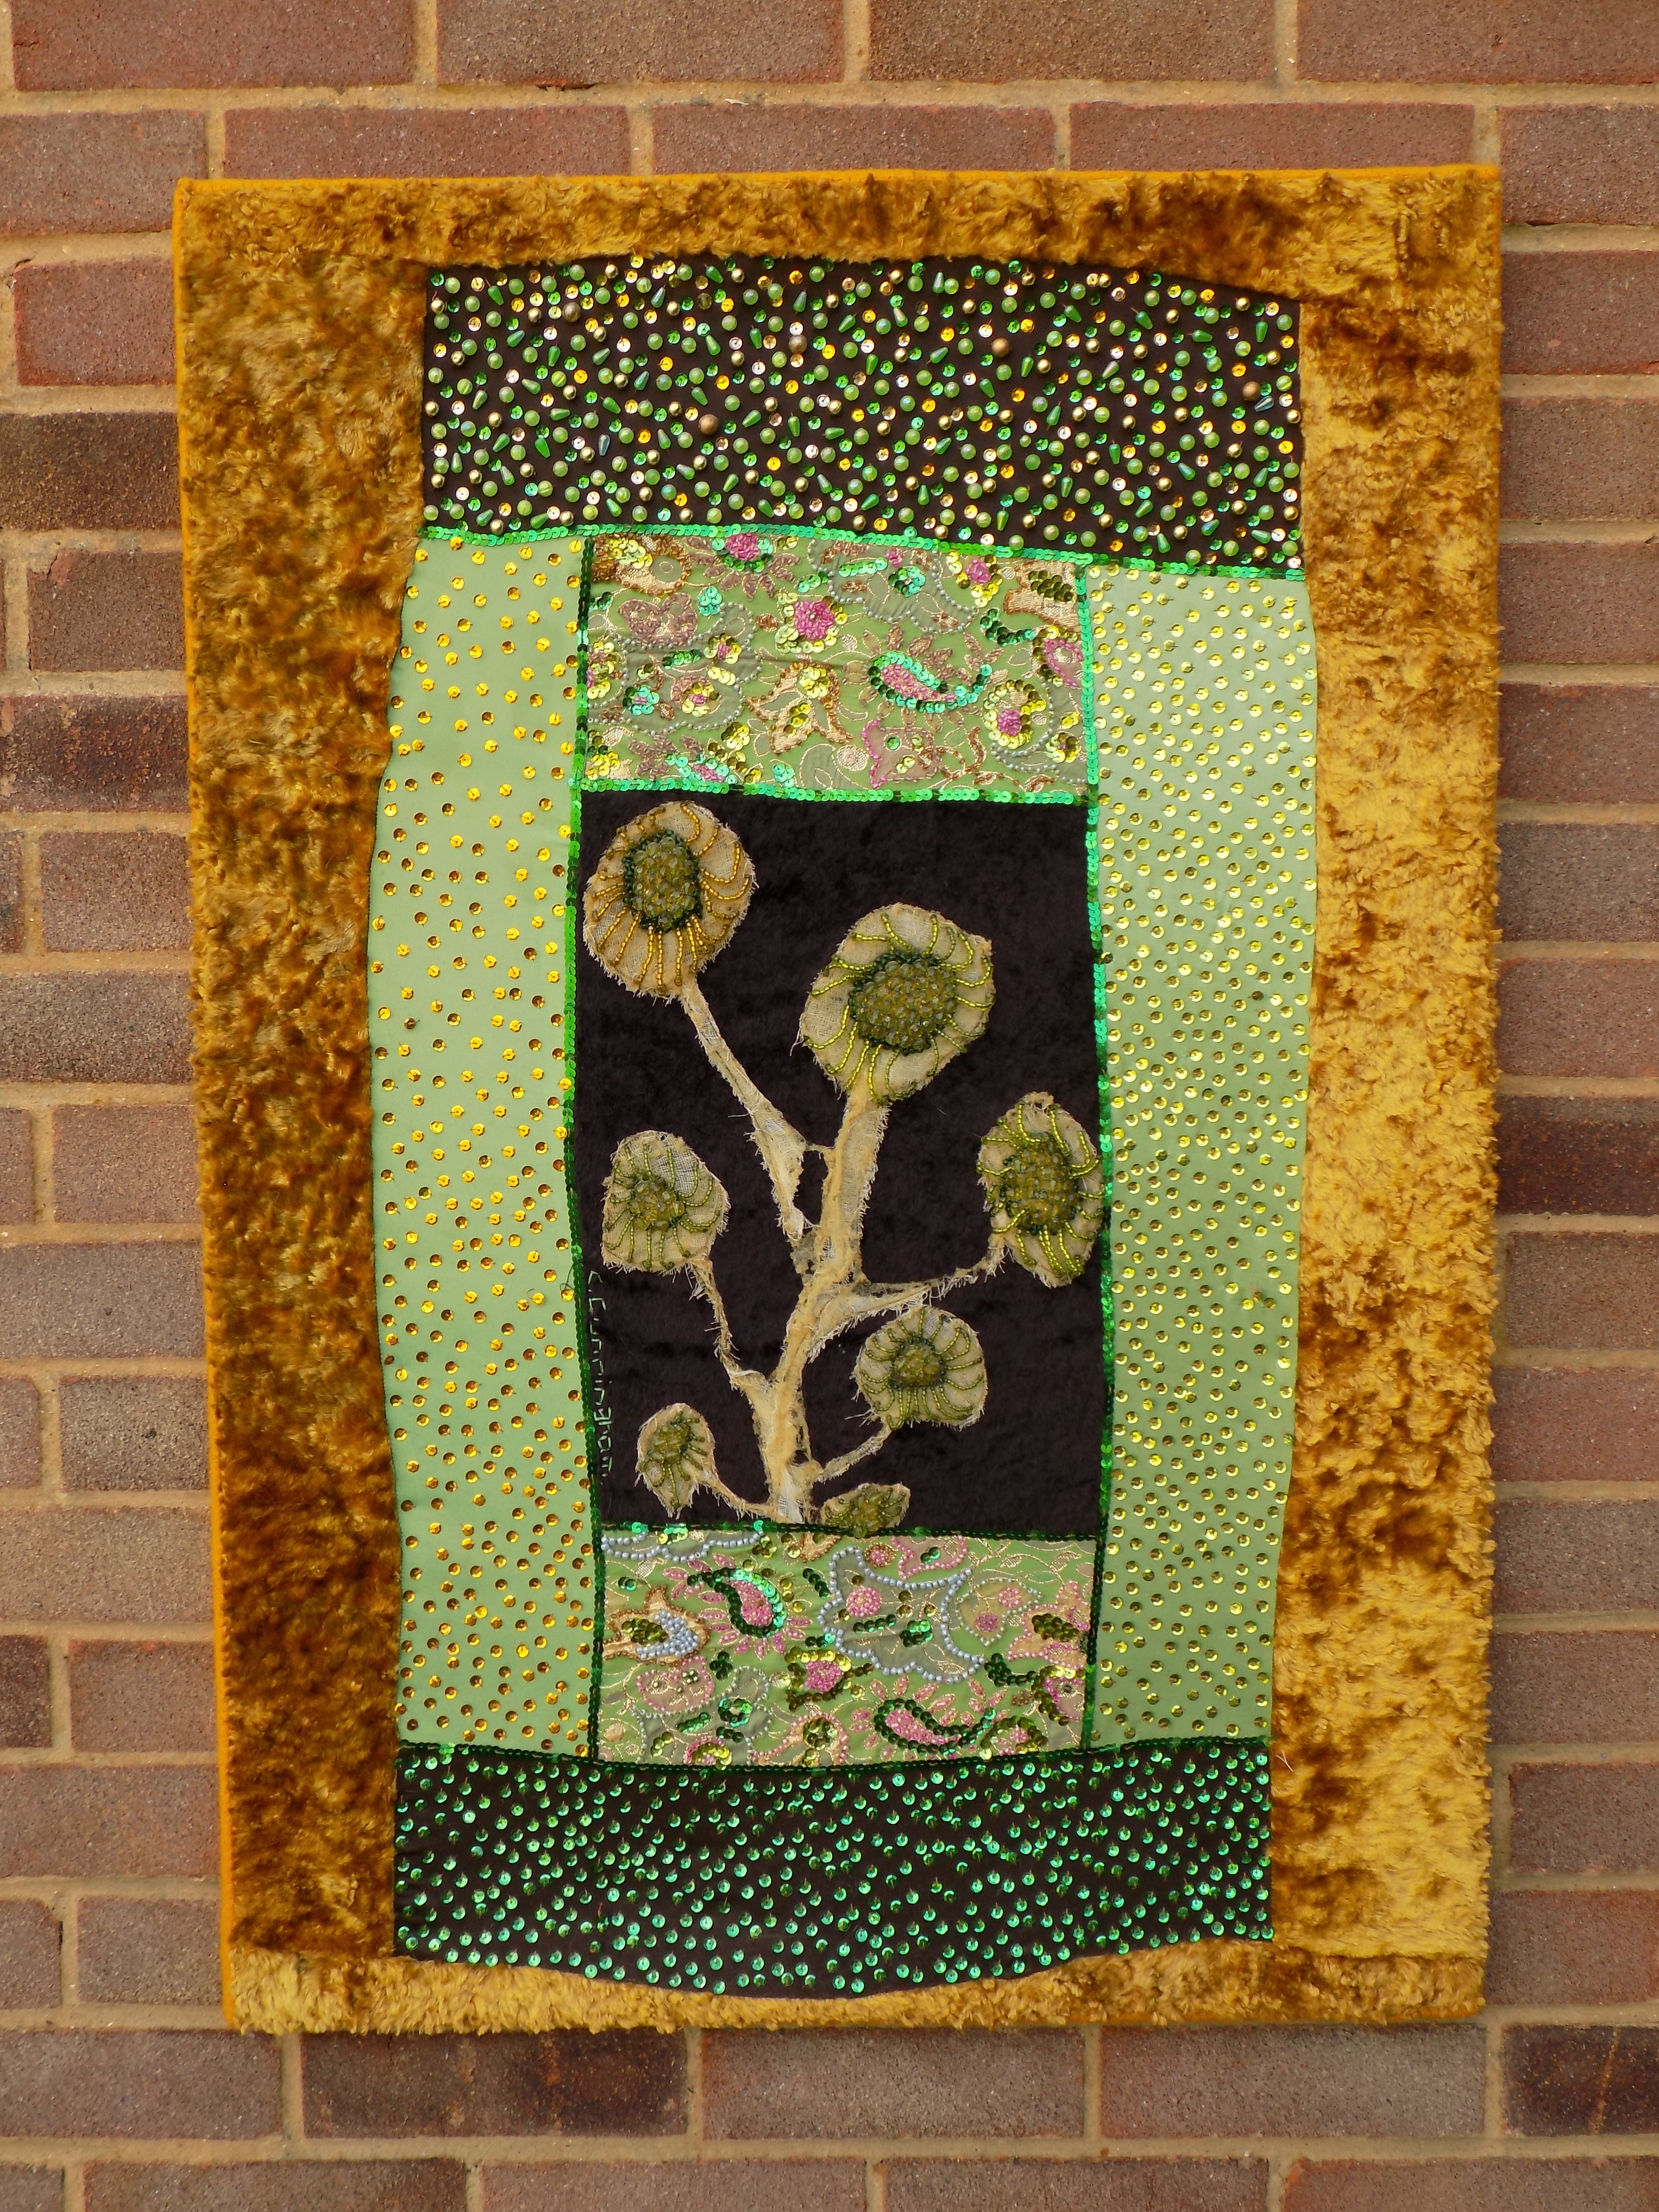 Christine Cunningham; ABSTRACT FLOWER DESIGN F, 2017, Original Textile, 27 x 40 inches. Artwork description: 241 Abstract flower design using applique embellished with beads and light reflective sequins.  Rich colour palette of green, gold and brown.  Inner framework.  From the Abstract Flower Design range in The Natural Collection...